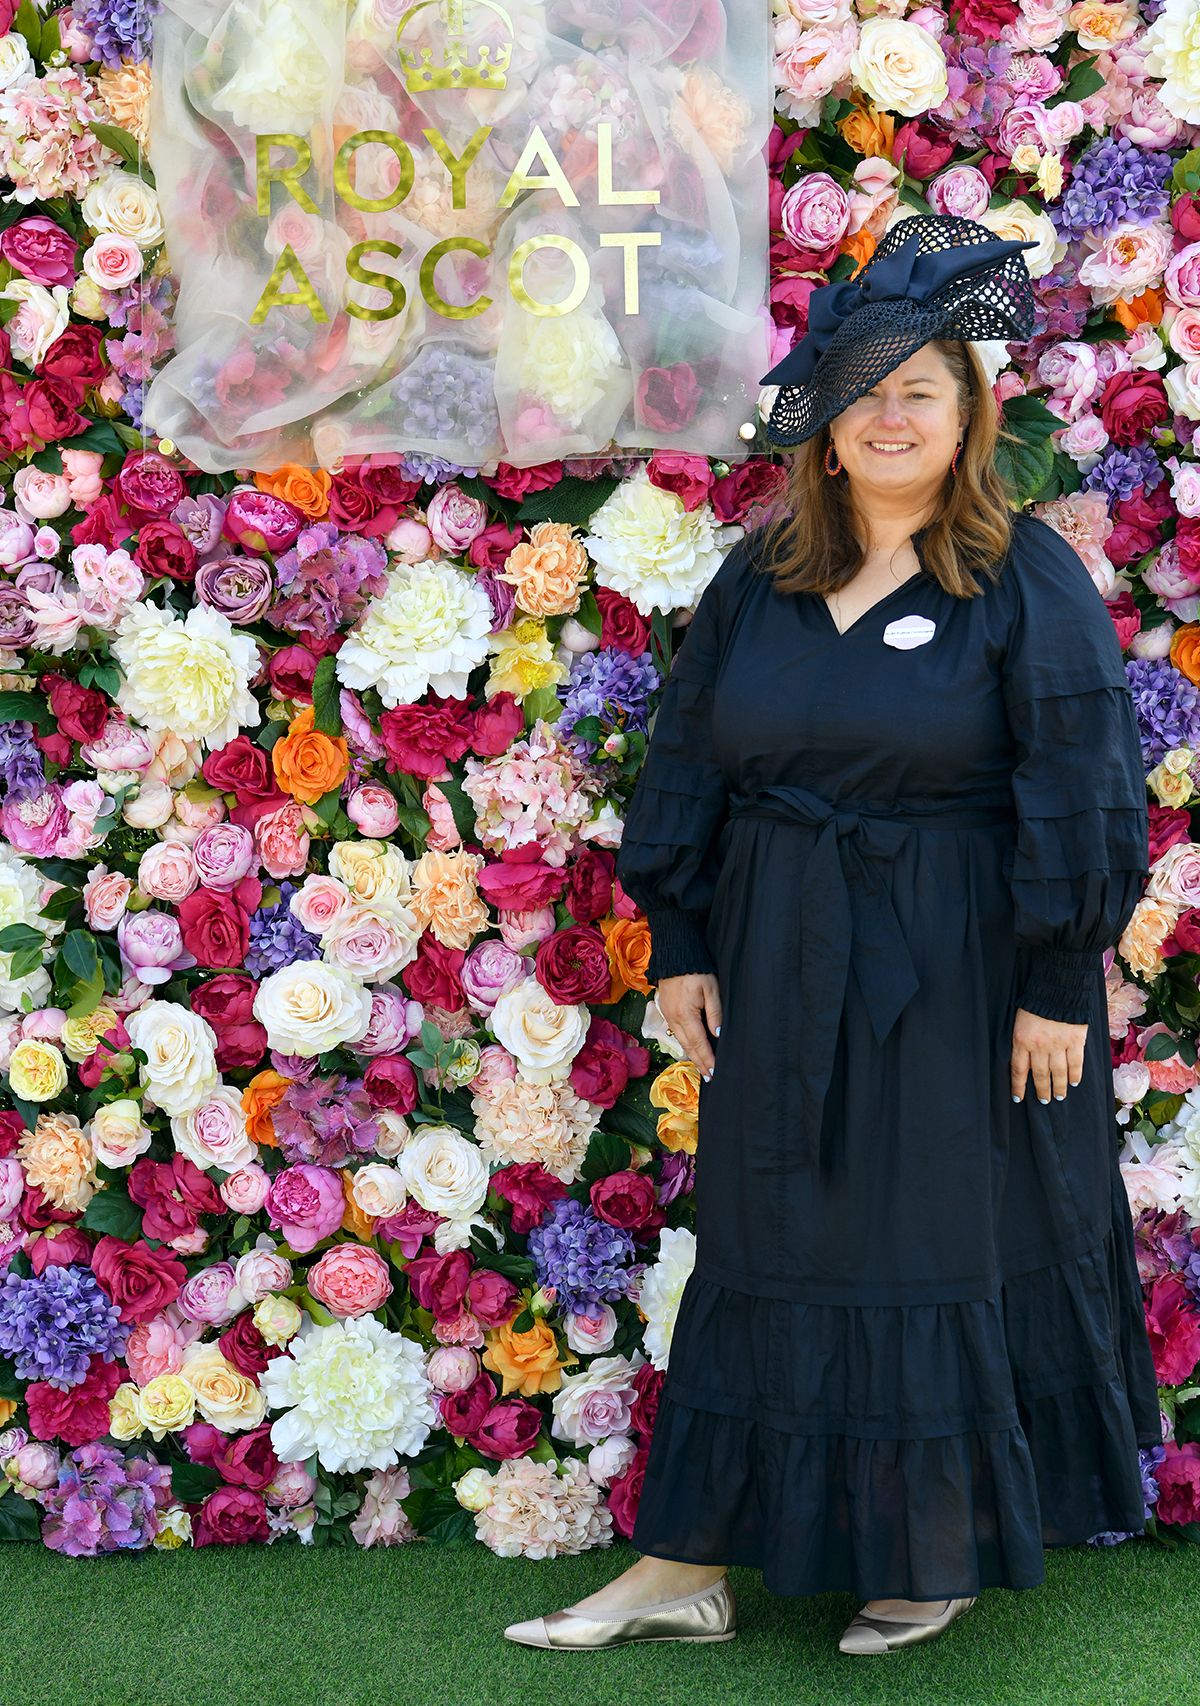 These Ultra-Fabulous Ascot Outfits Are Exactly What I Needed